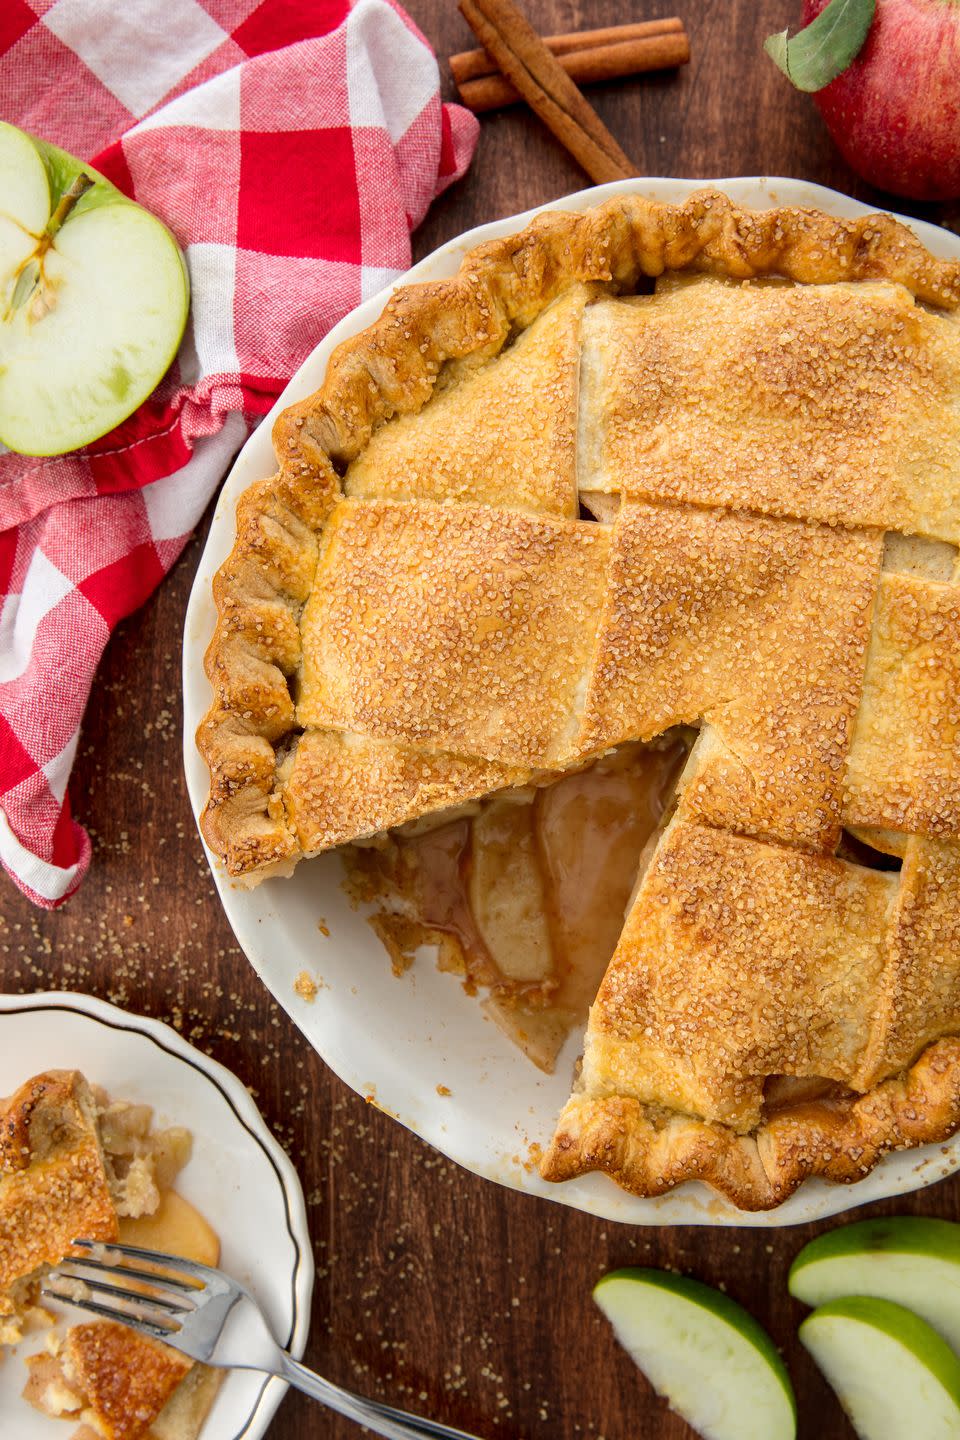 <p>A homemade apple pie that will even impress your grandma.</p><p>Get the recipe from <a href="https://www.delish.com/cooking/recipe-ideas/recipes/a55693/best-homemade-apple-pie-recipe-from-scratch/" rel="nofollow noopener" target="_blank" data-ylk="slk:Delish" class="link ">Delish</a>.</p>